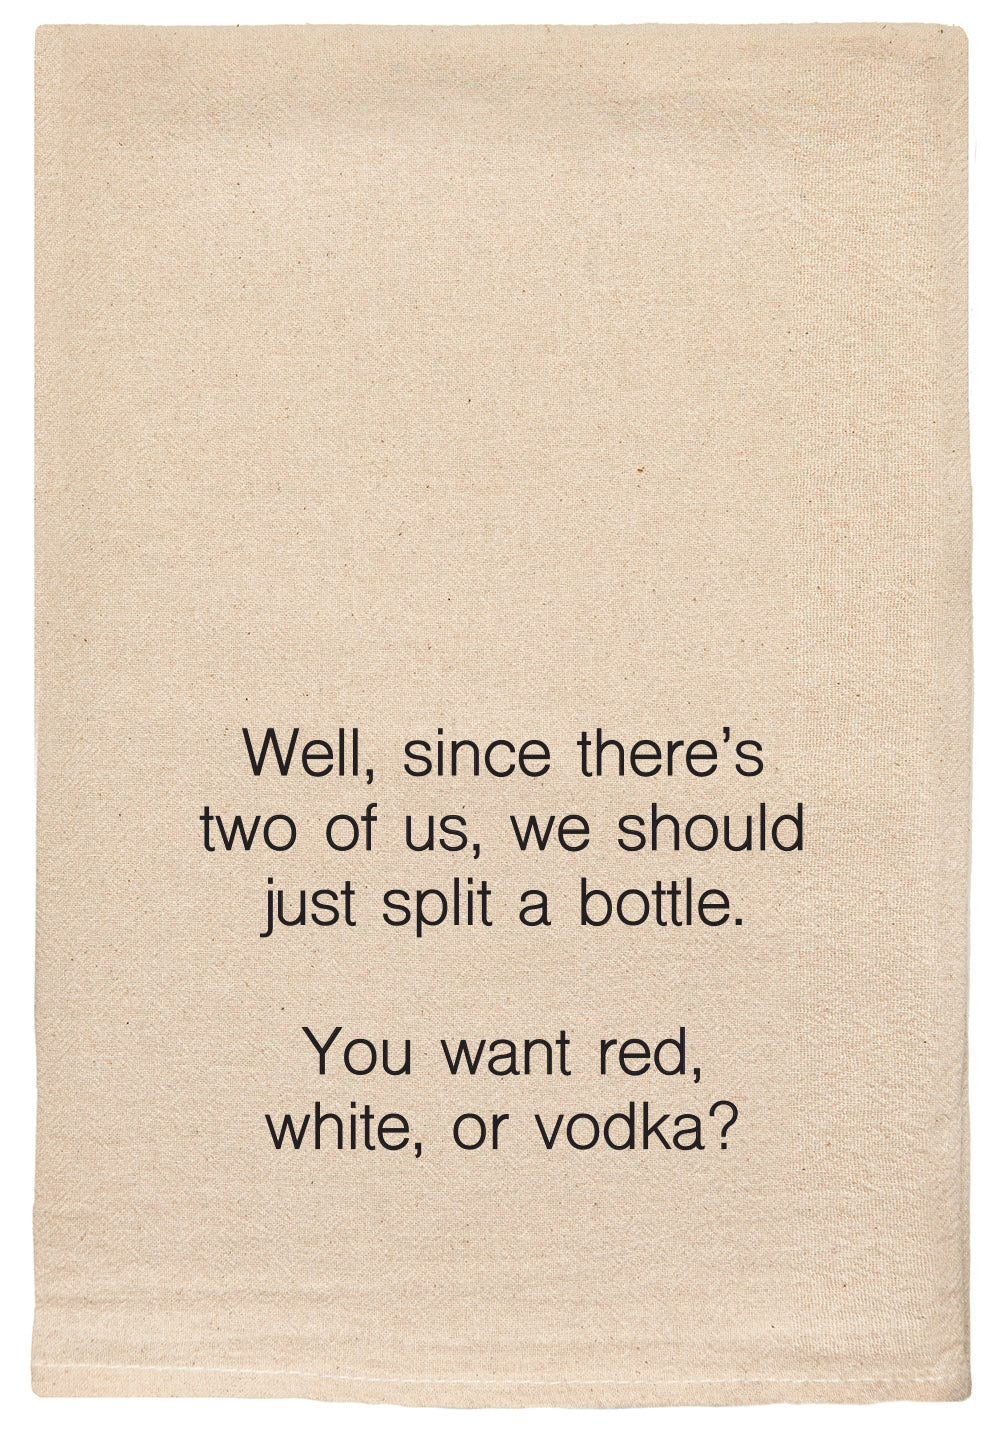 Well, since there's two of us, we should just split a bottle. You want red, white, or vodka?